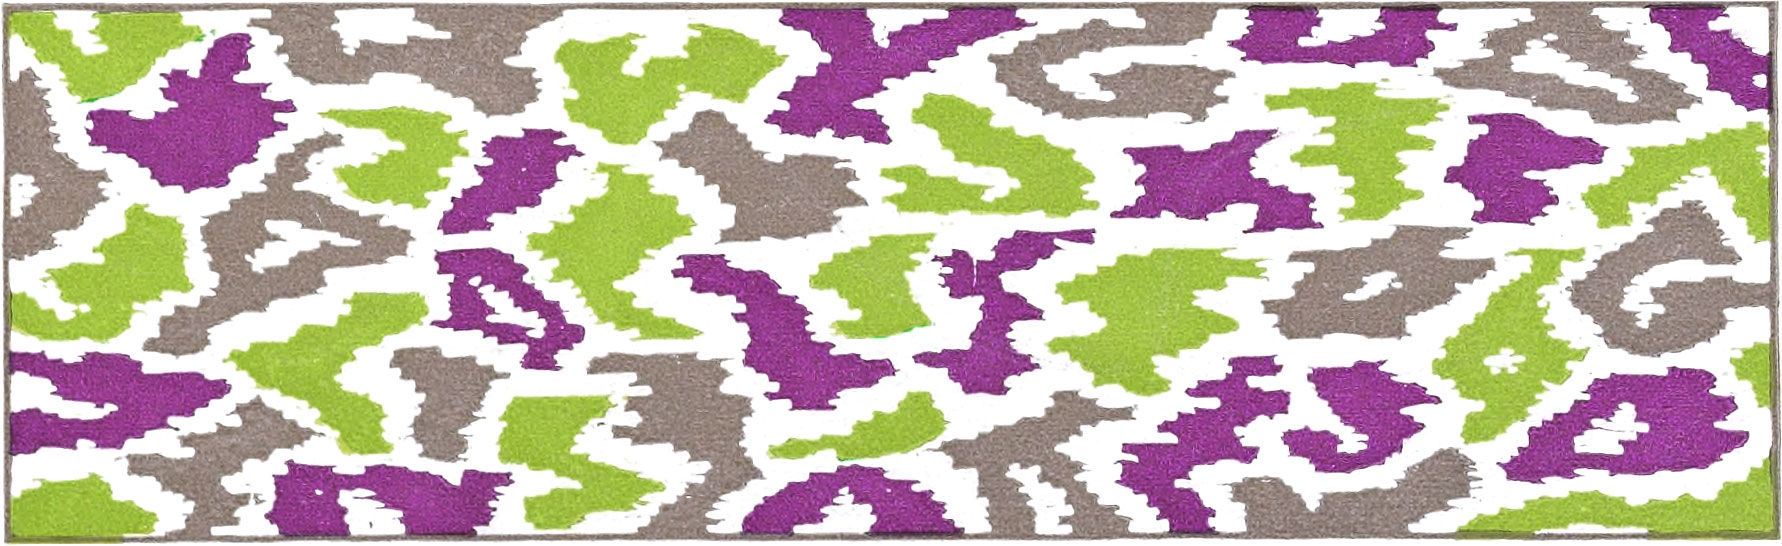 Camouflage-like pattern of purple, light green, and olive